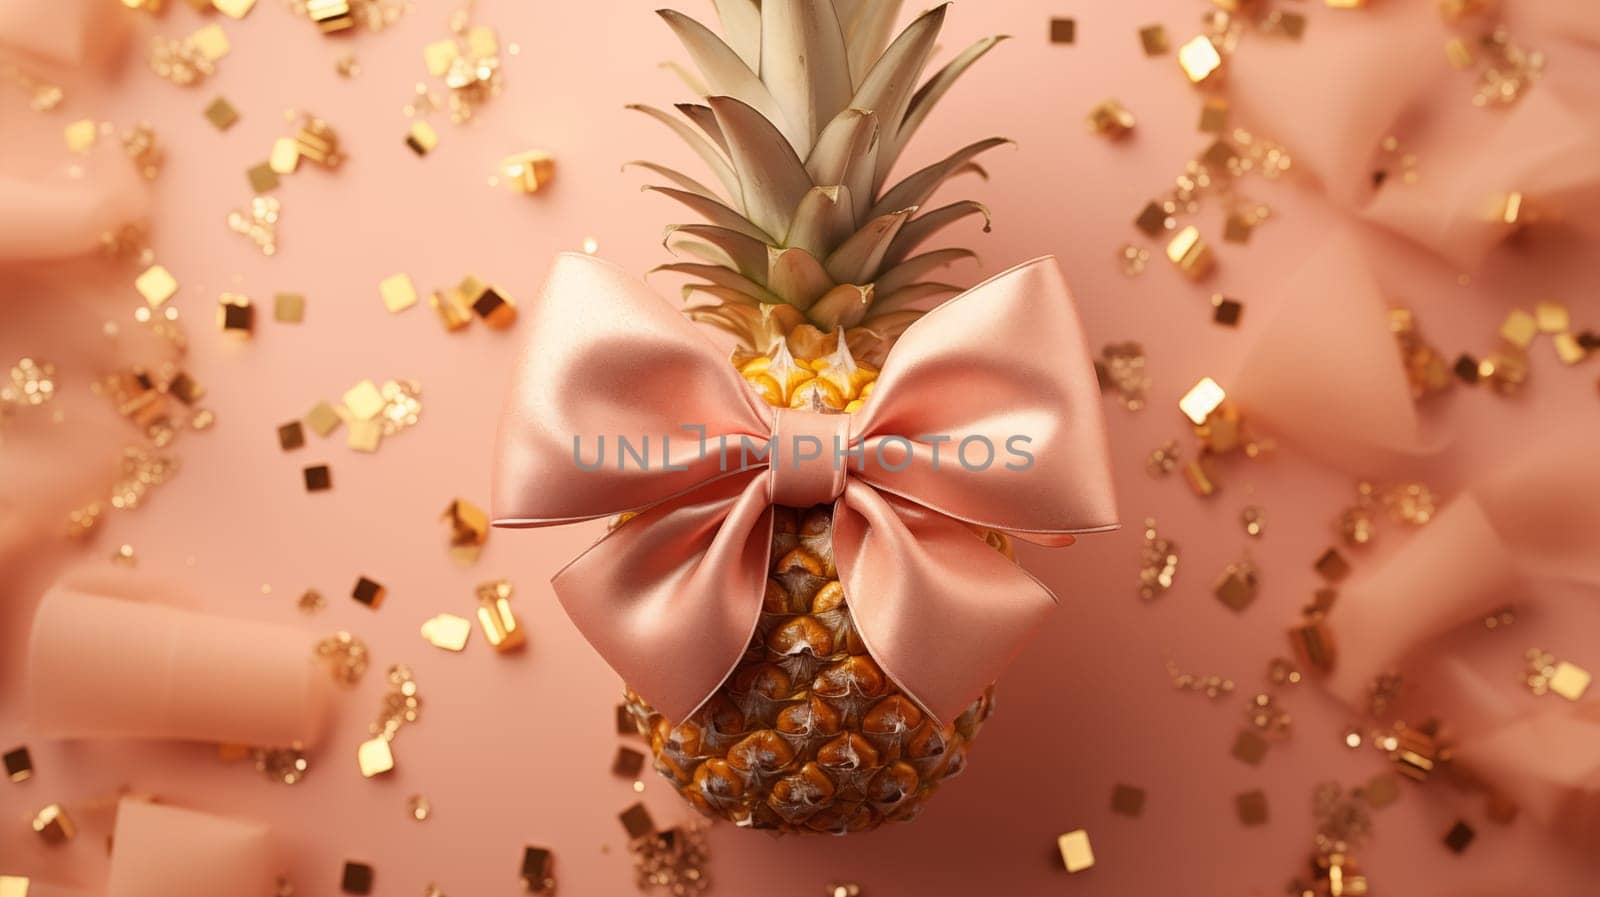 A pineapple with a pink bow lies on a peach-colored background, and golden confetti is scattered nearby.